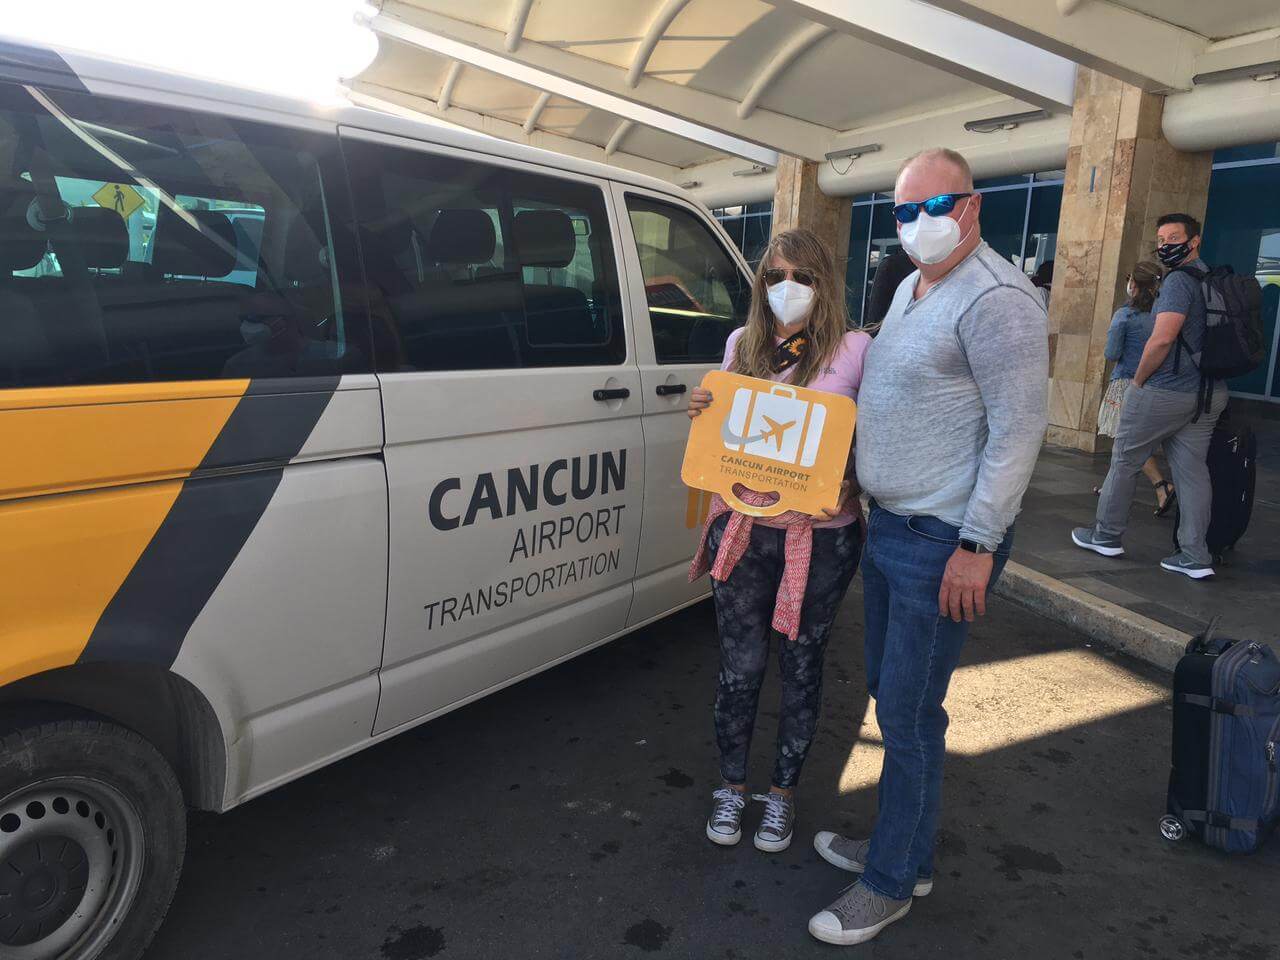 Two adults wearing masks at Cancun Airport after Private Transportation